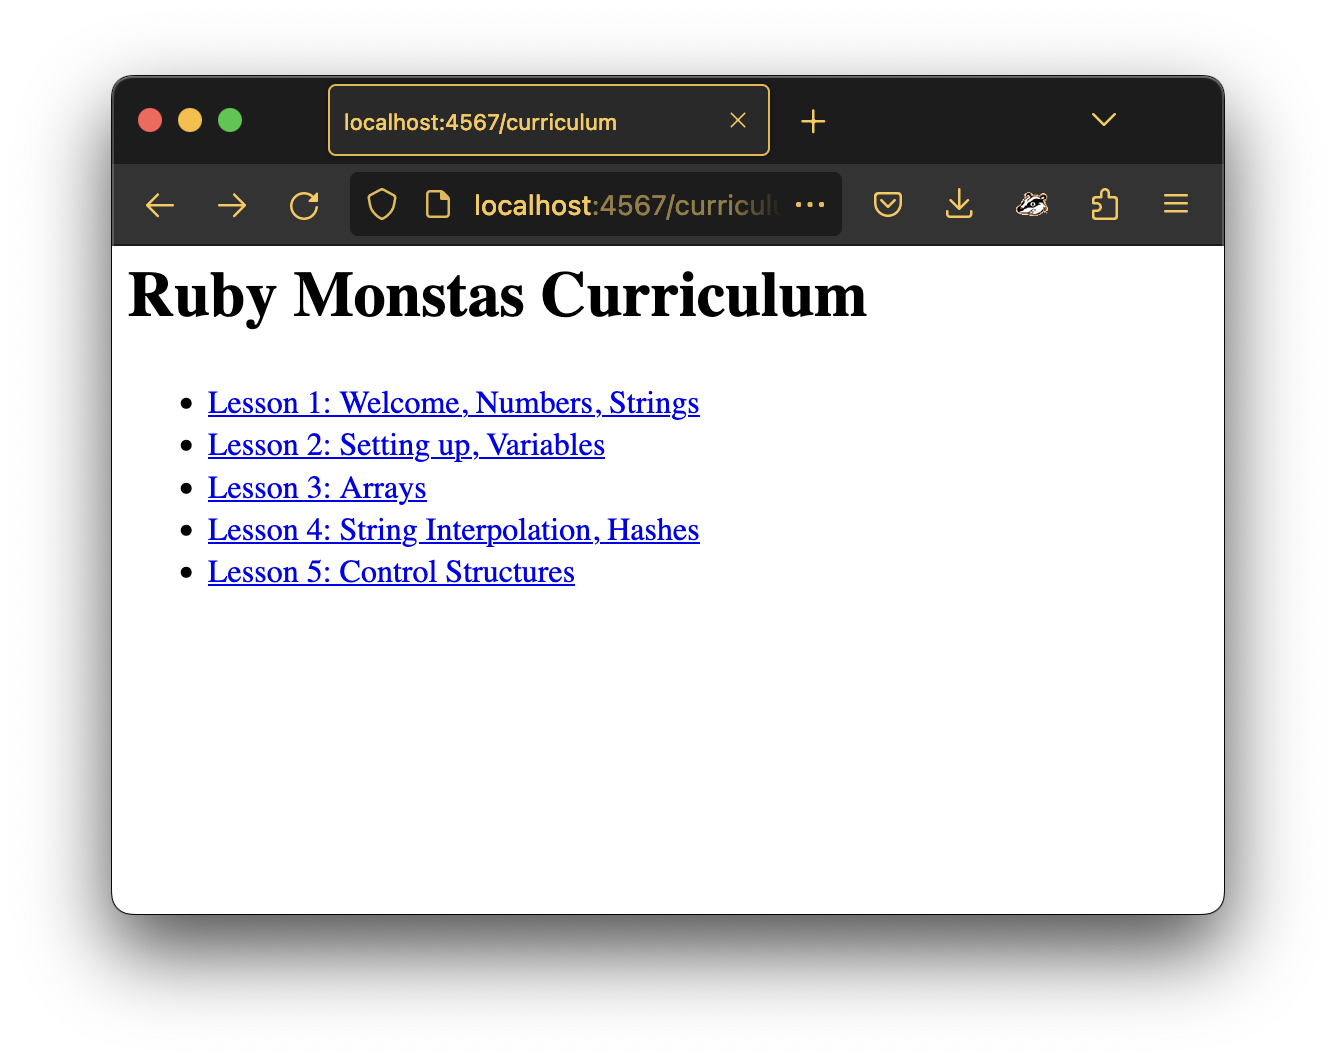 Screen shot of a browser window of the Sinatra application showing the list of curriculum entries where each item is a link